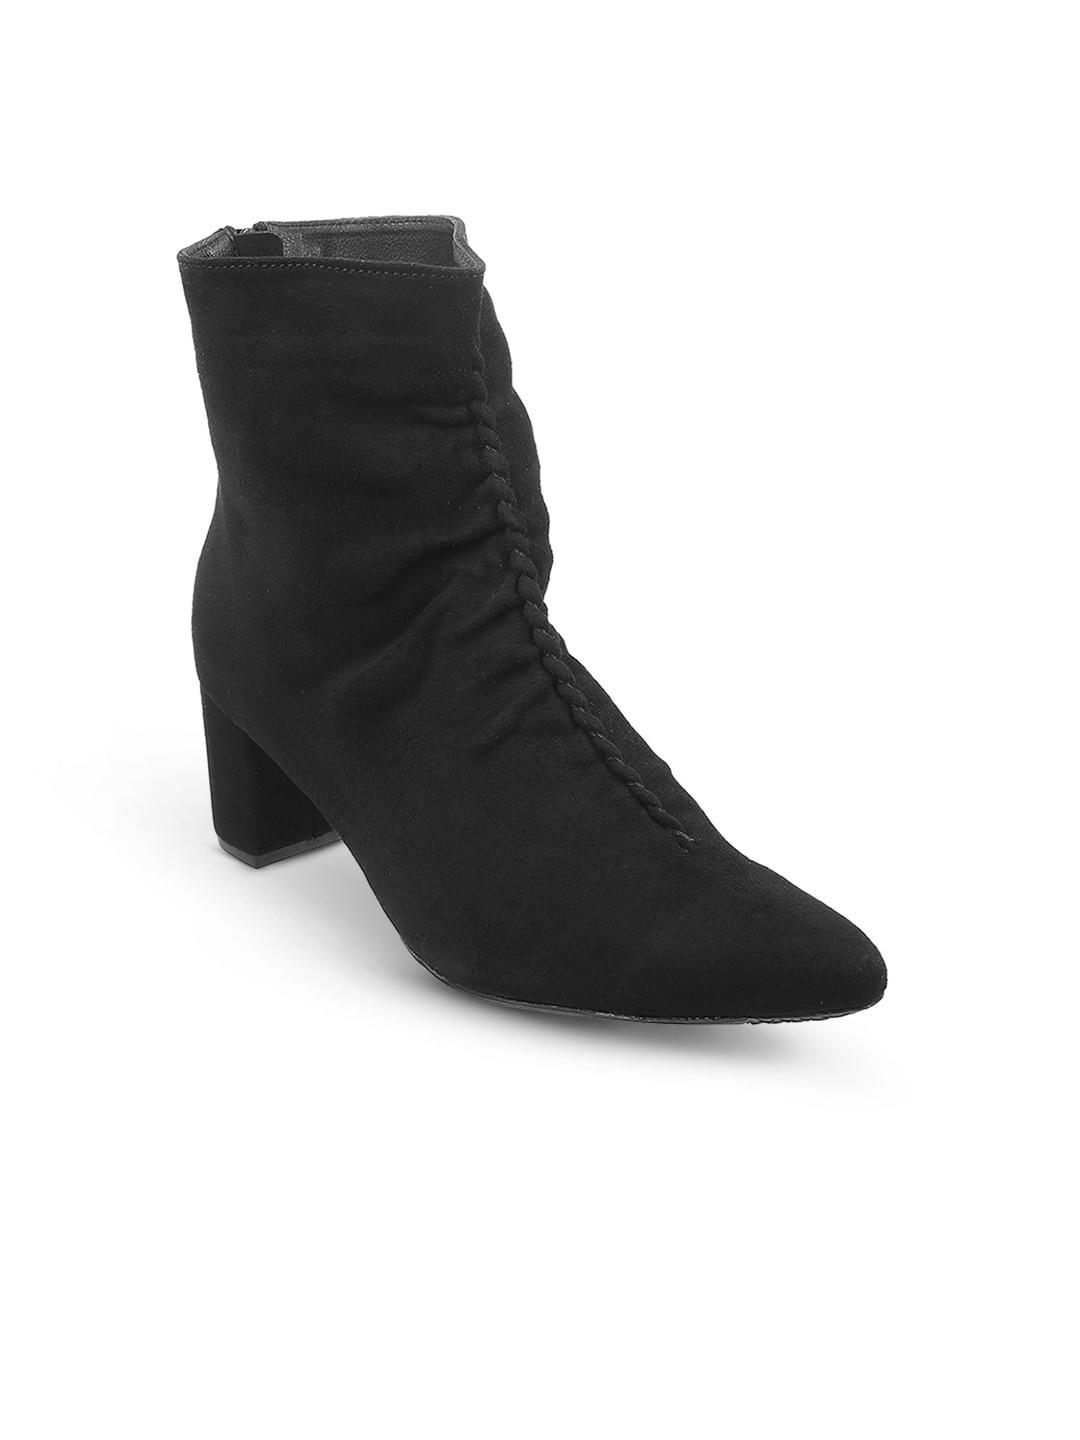 mochi high top pointed toe block heeled boots